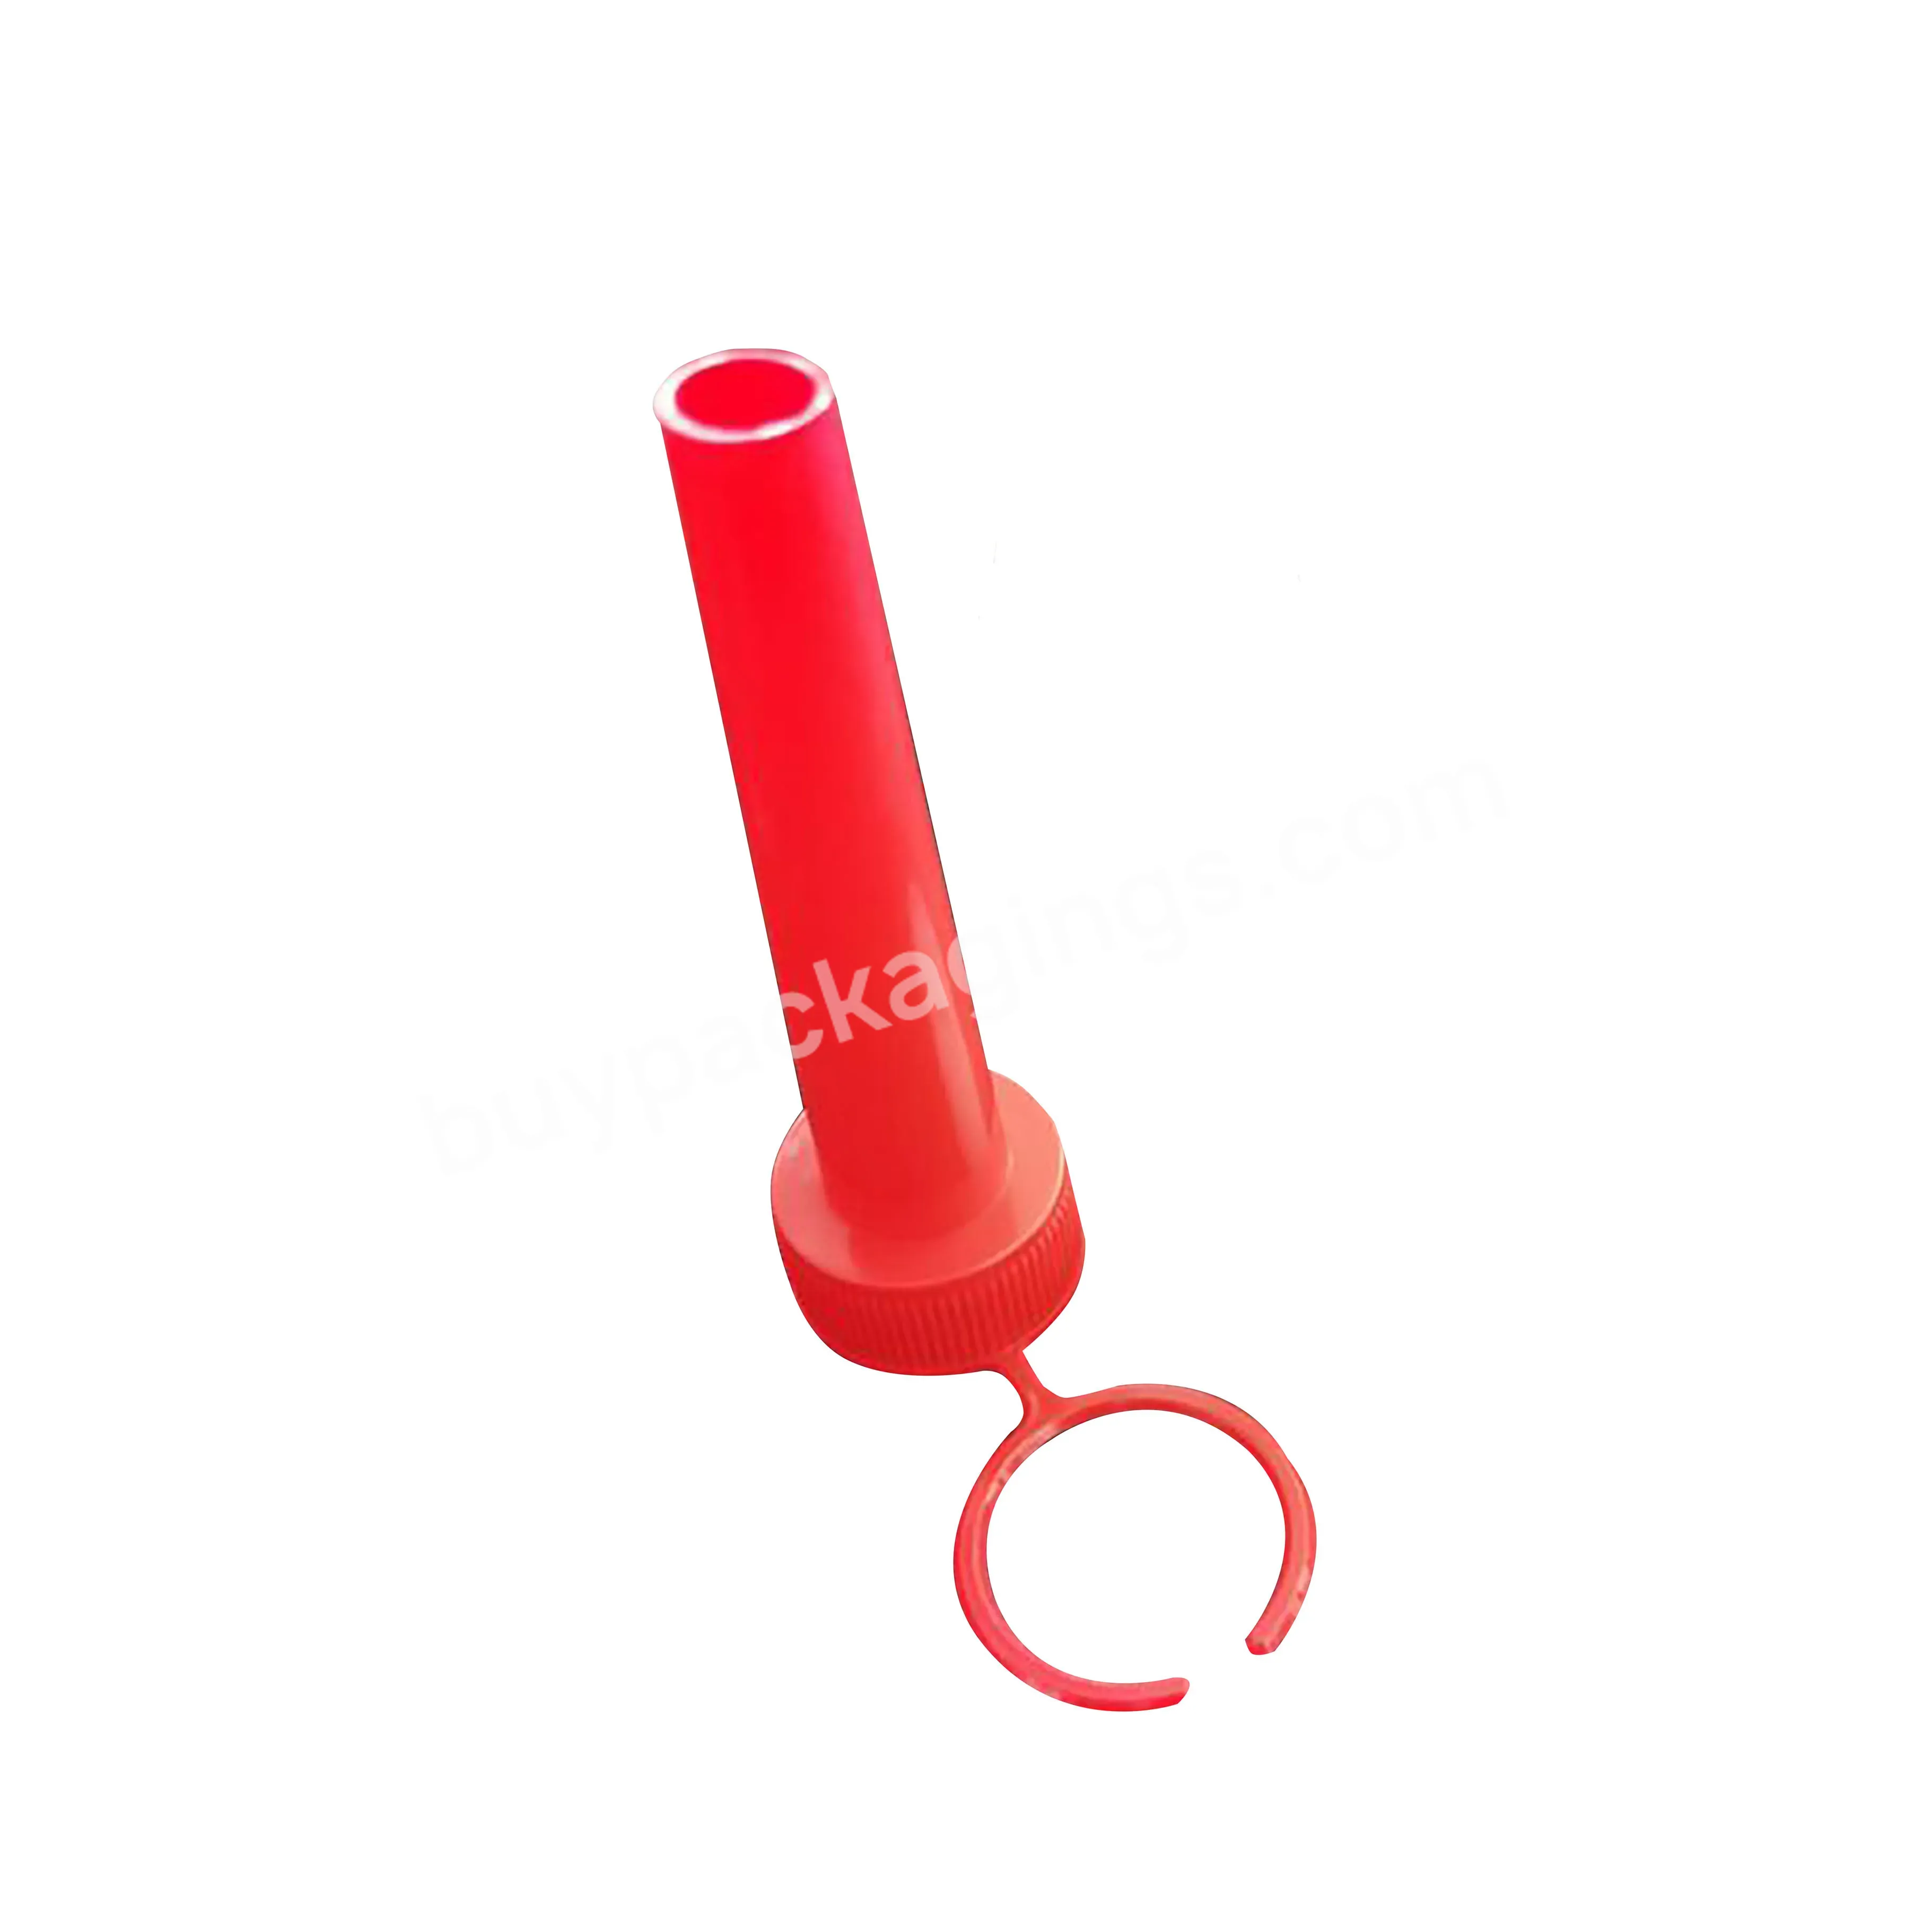 Wholesale Aerosol Can Hand-pulled Plastic Round Cap Gasoline Additive Sealing Cap One Inch Pp Plug Fuel Cap - Buy Wholesale Aerosol Can Hand-pulled Plastic Round Cap,Gasoline Additive Sealing Cap,One Inch Pp Plug Fuel Cap.